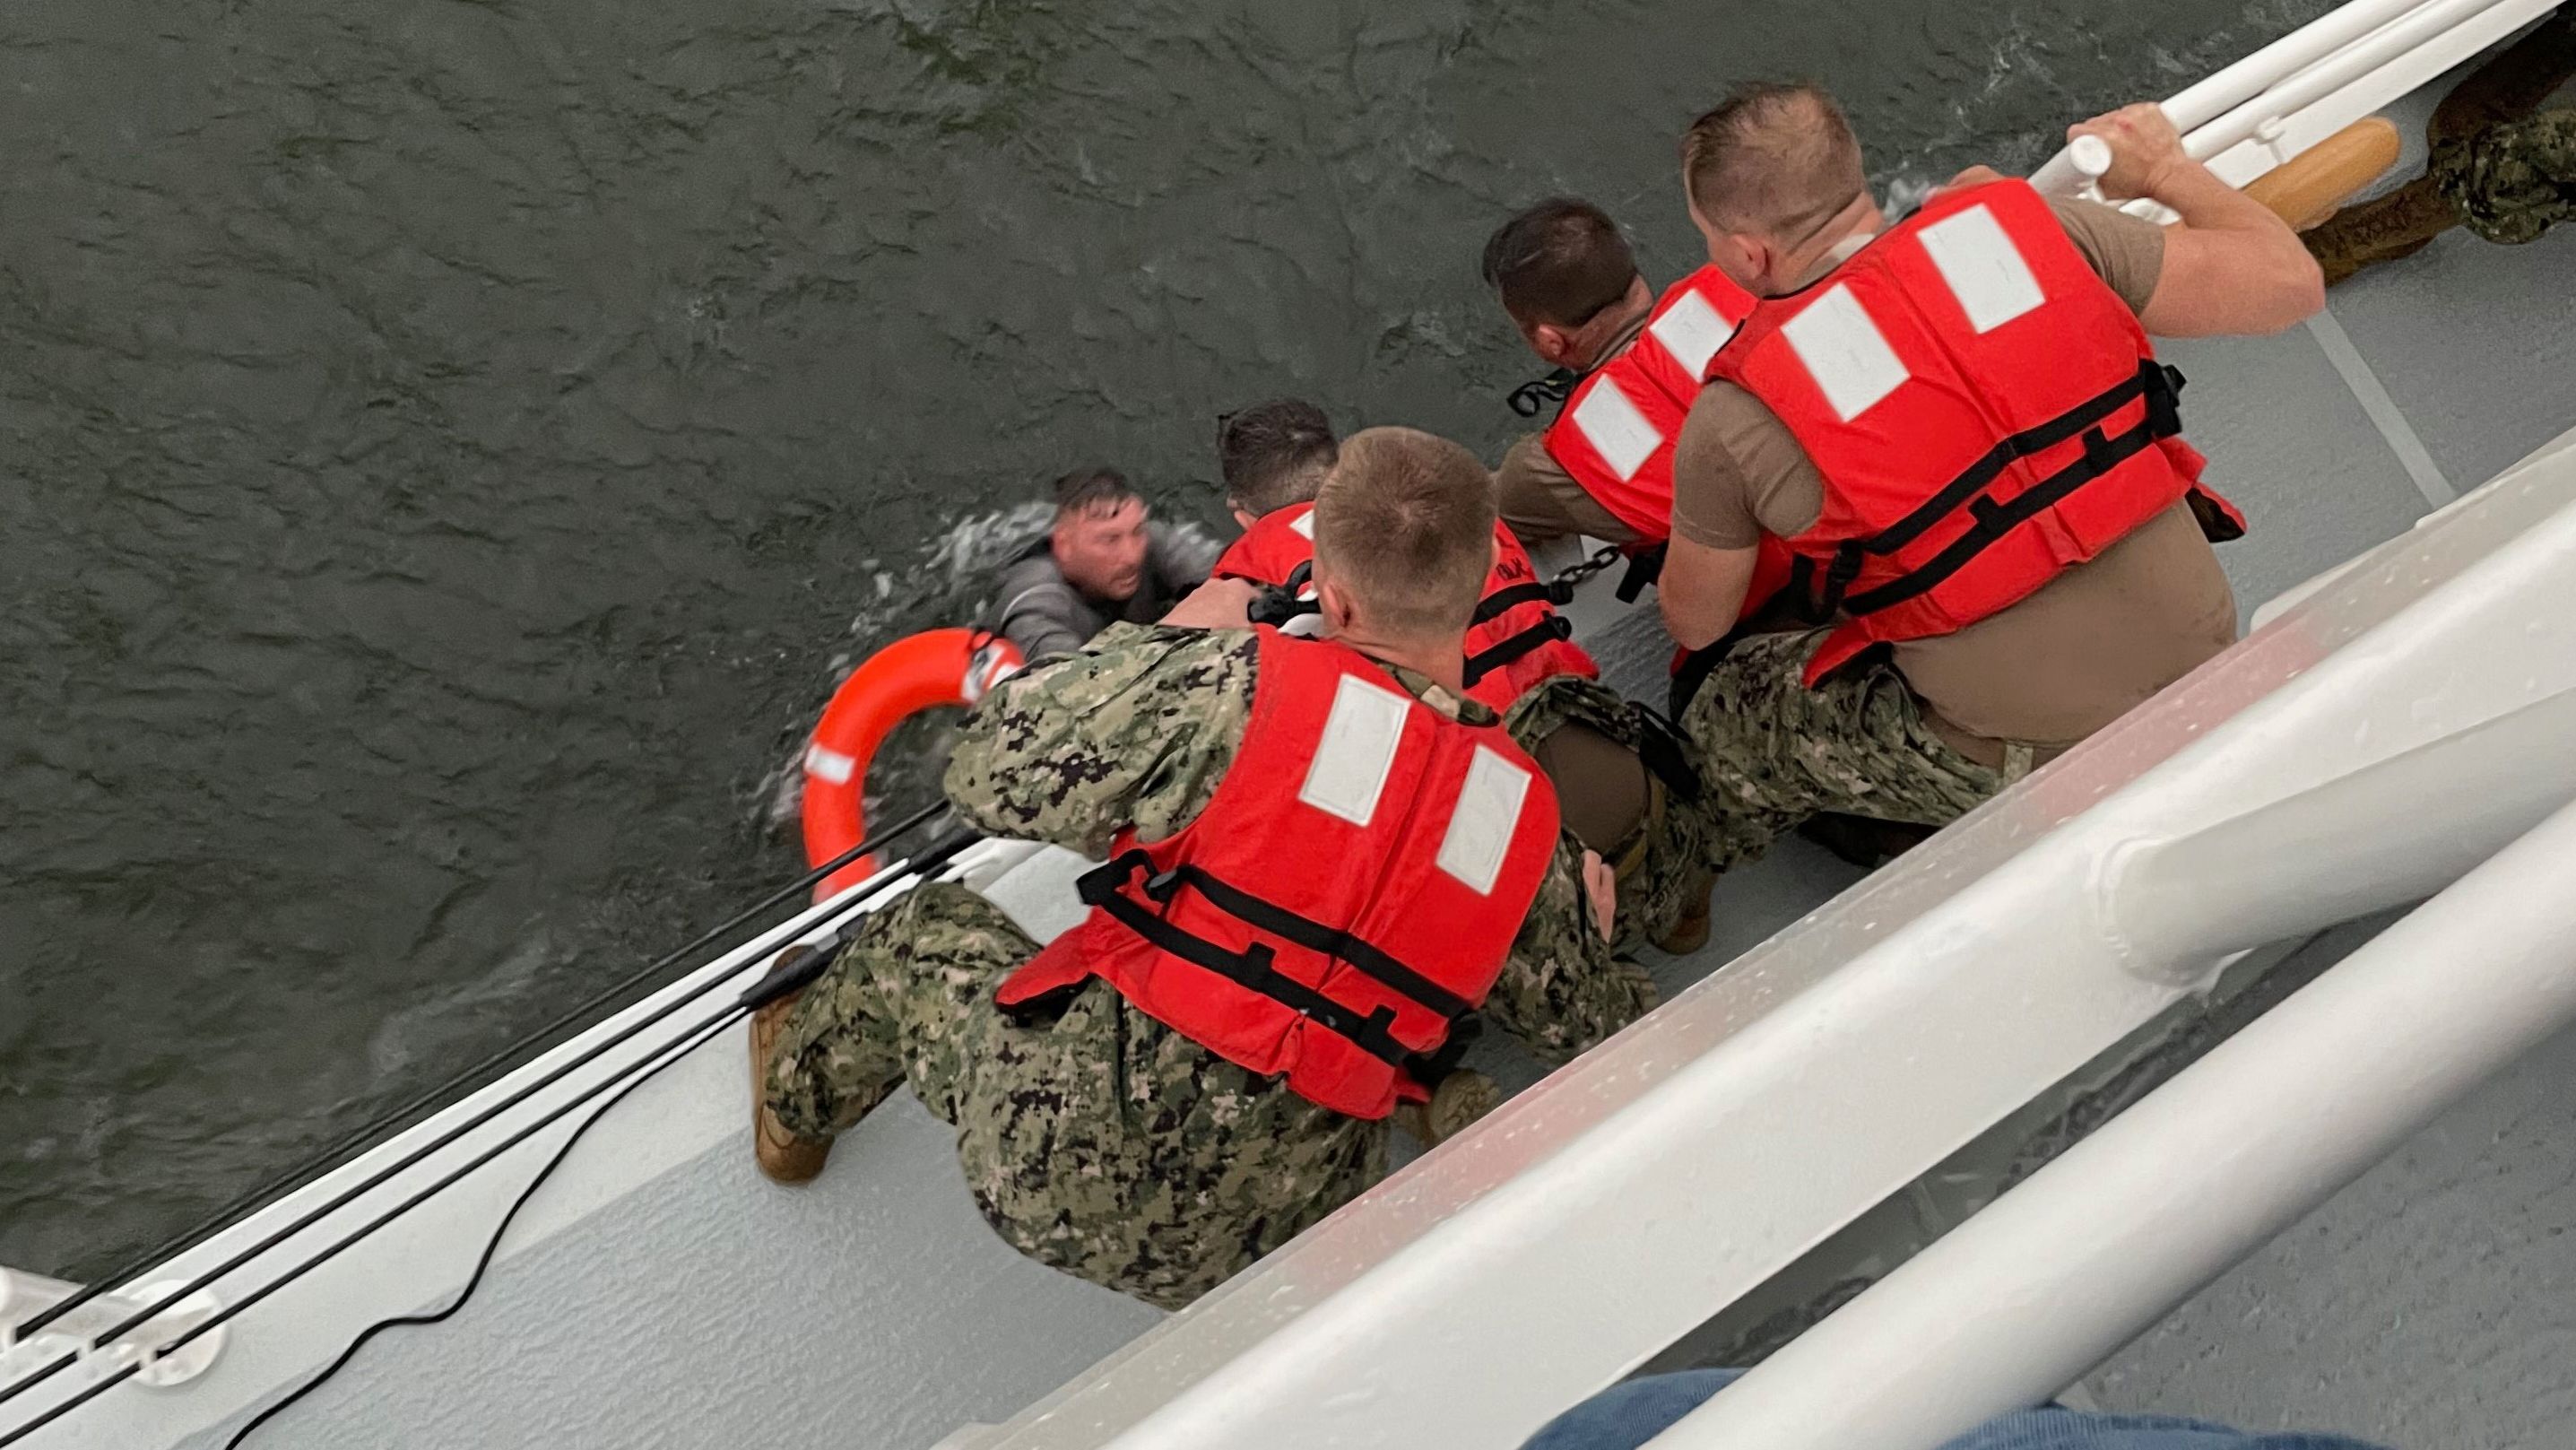 Crew members of the Coast Guard cutter Glenn Harris pull a person from the water after a 129-foot commercial liftboat capsized off the Louisiana coast on Tuesday, April 13.